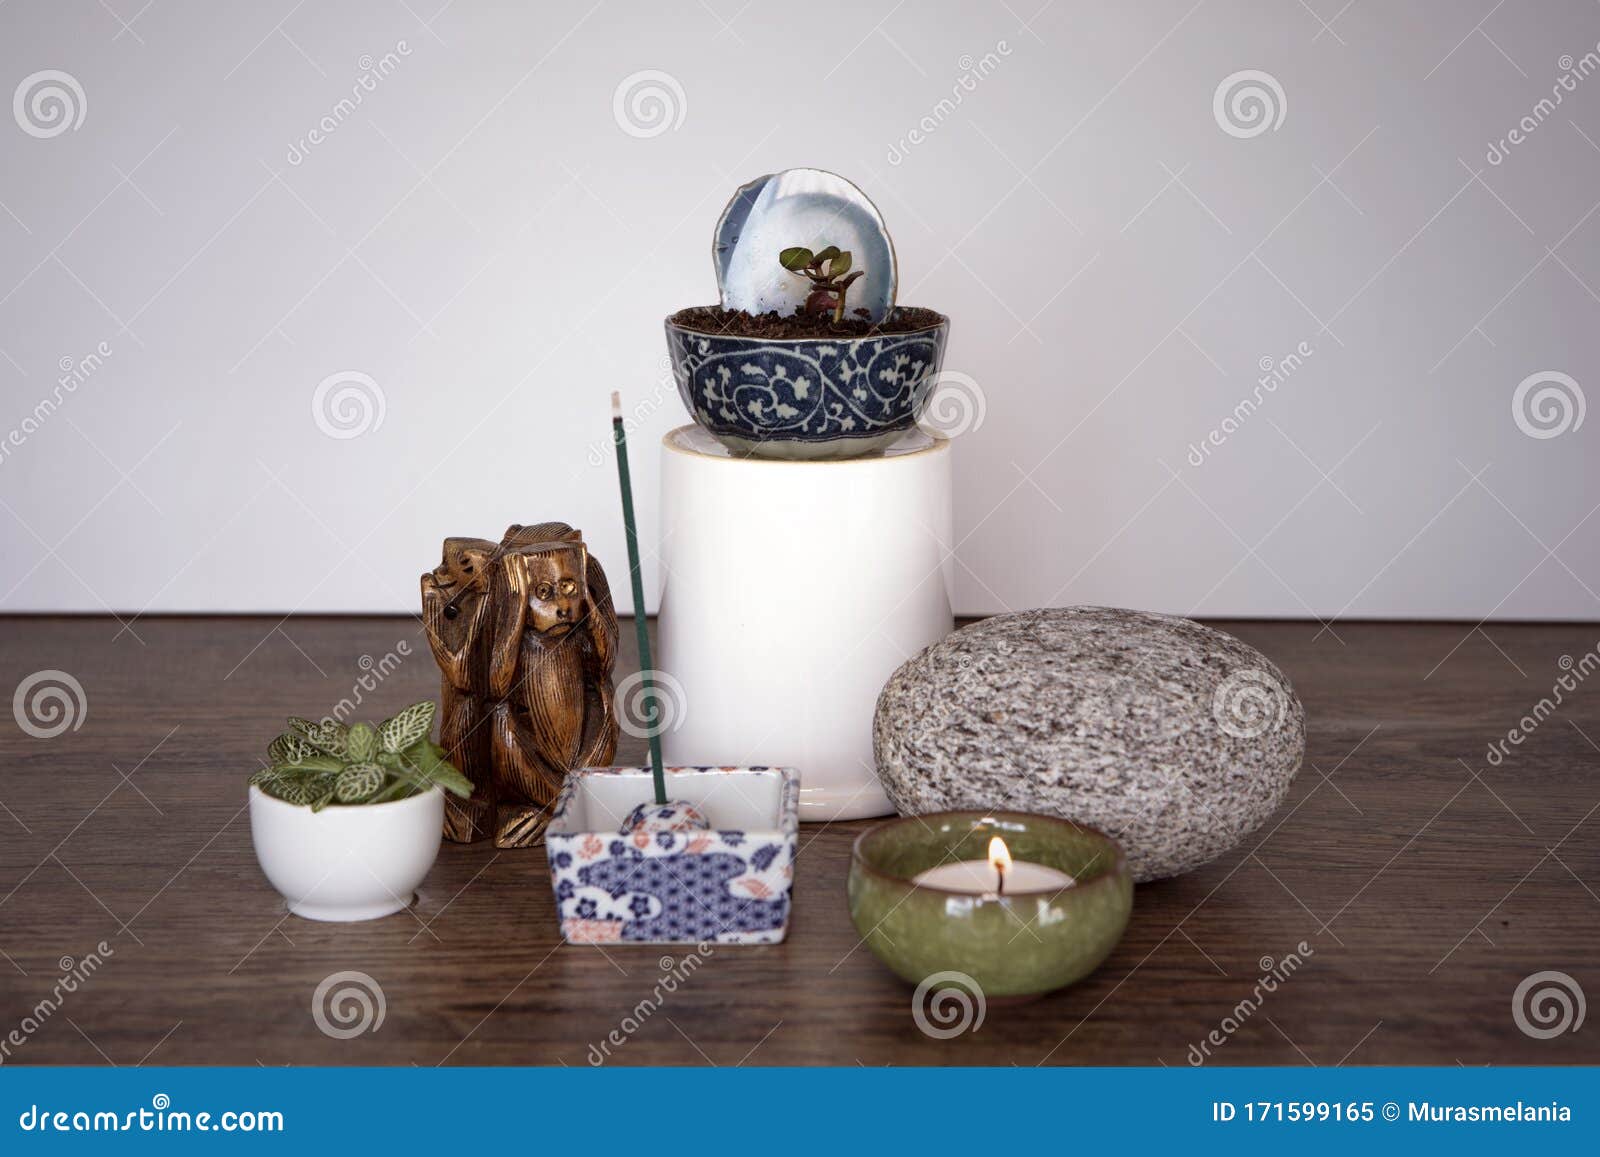 Home Altar. Spiritual Decor Arrangement with Burning Candle, Incense  Sticks, Stone and Fresh Plants. Spirituality at Home Concept. Stock Image -  Image of buddhism, decoration: 171599165